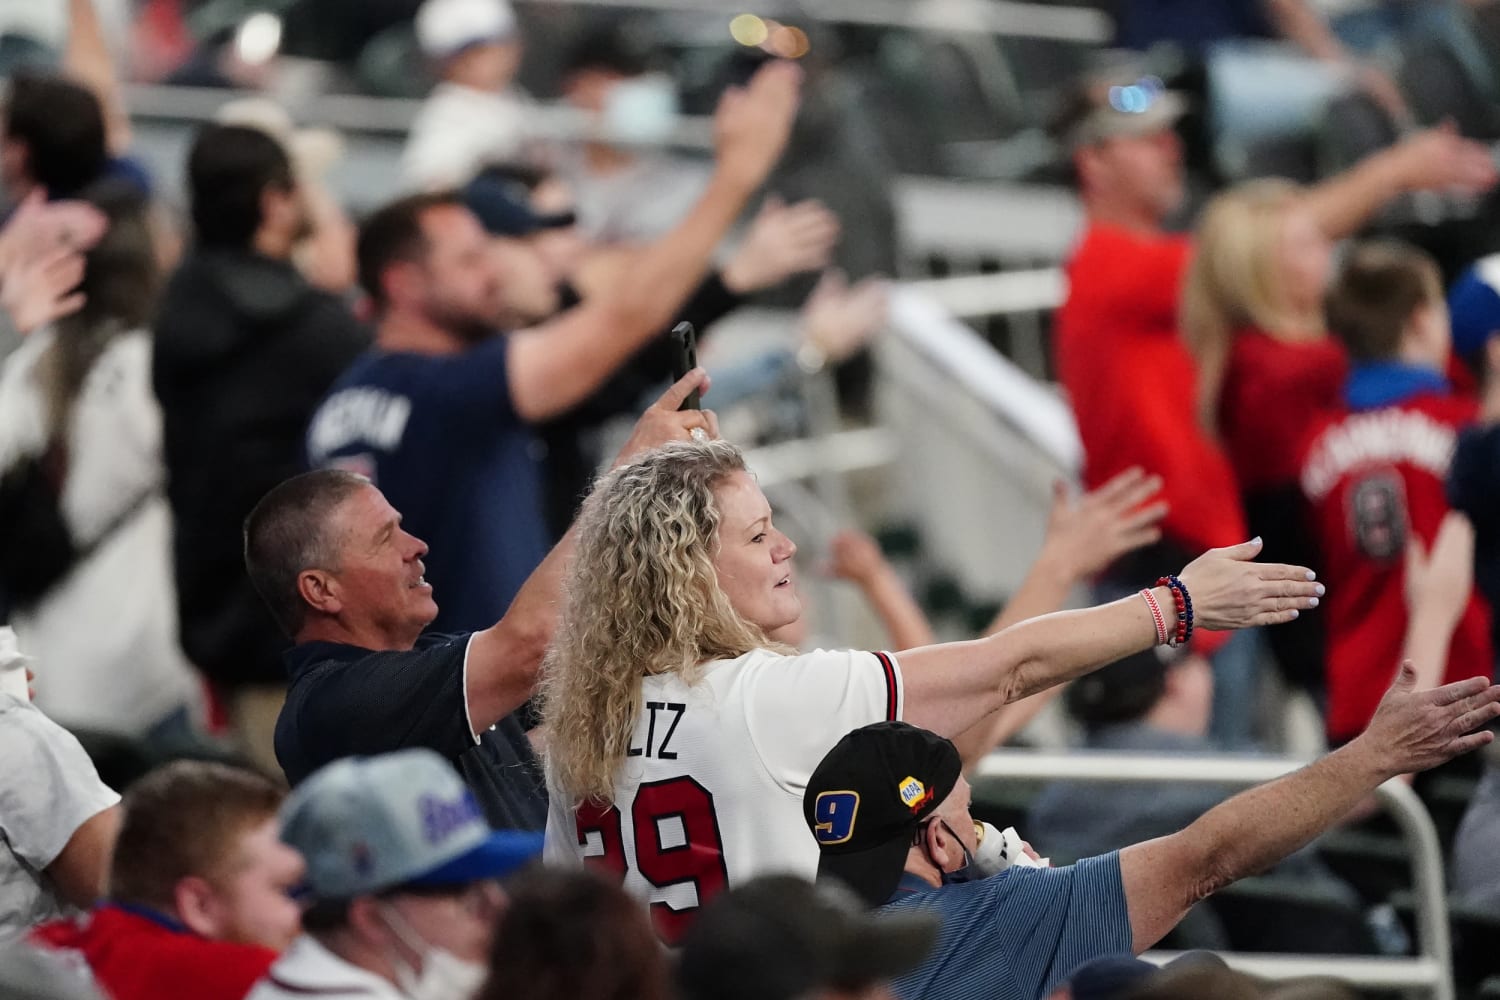 Native American tribes say Atlanta Braves’ tomahawk chop is ‘more of a caricature’